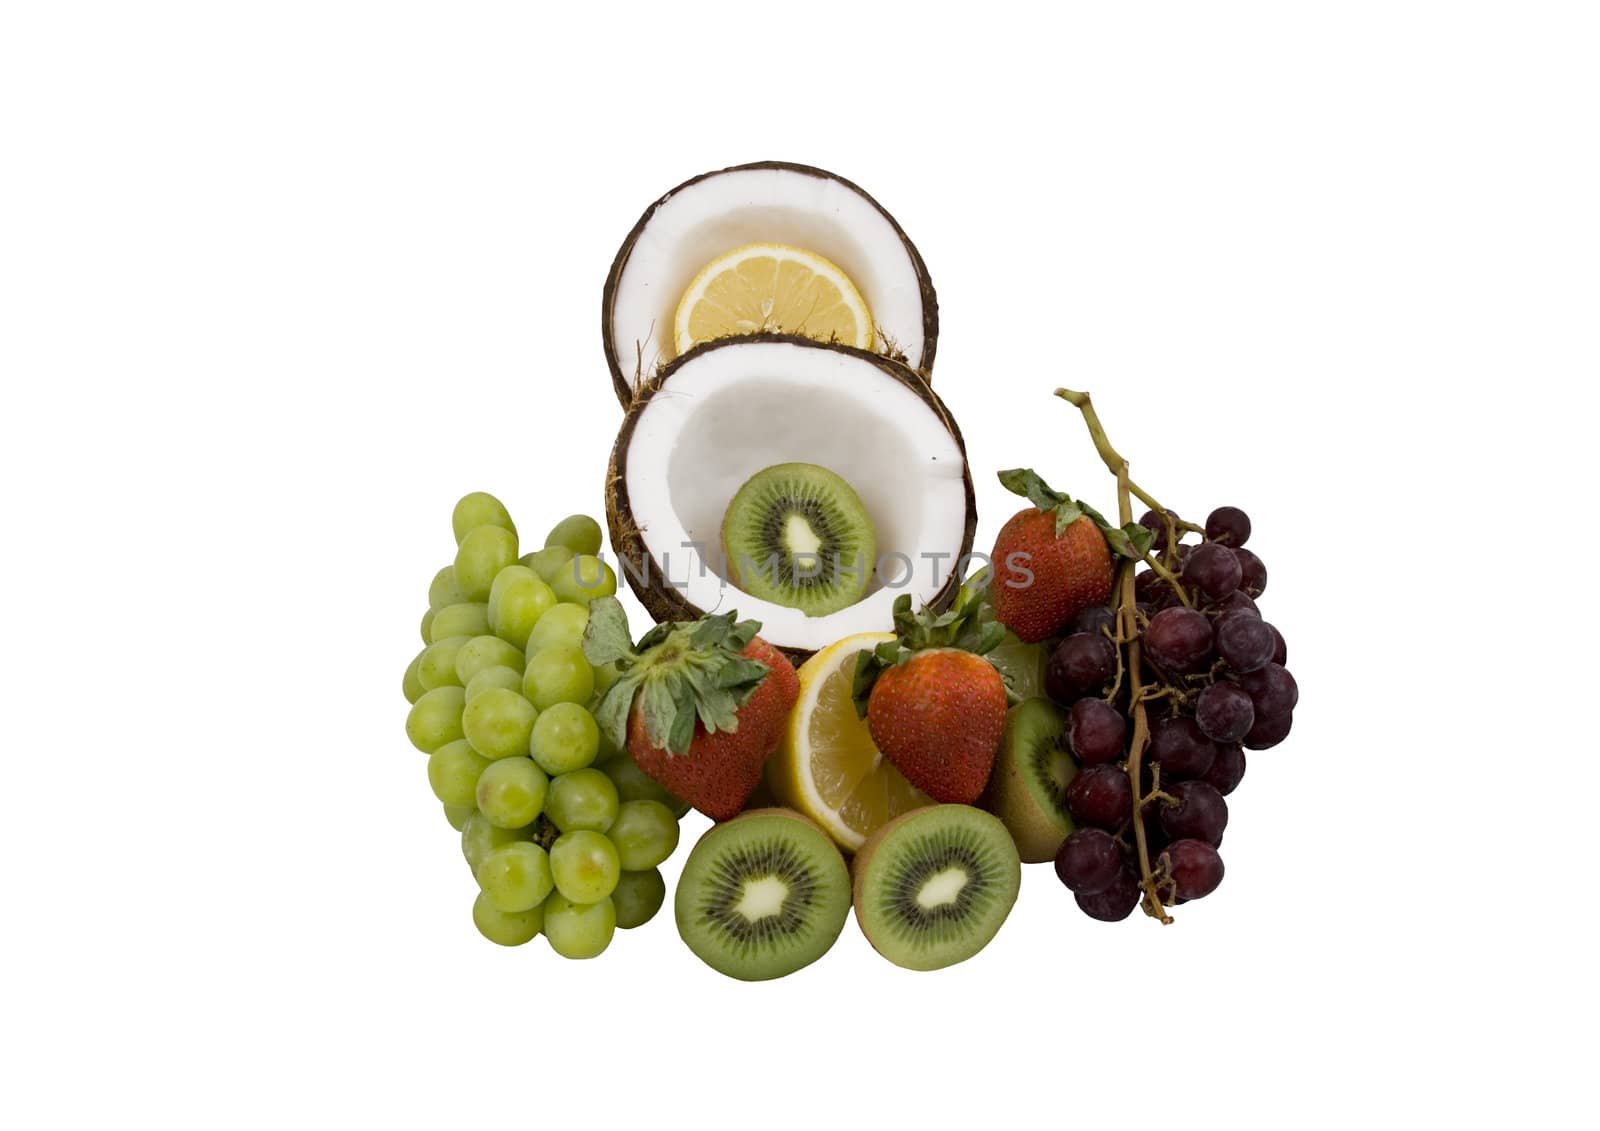 A bunch of fresh fruit isolated on a white background good heathy eating image